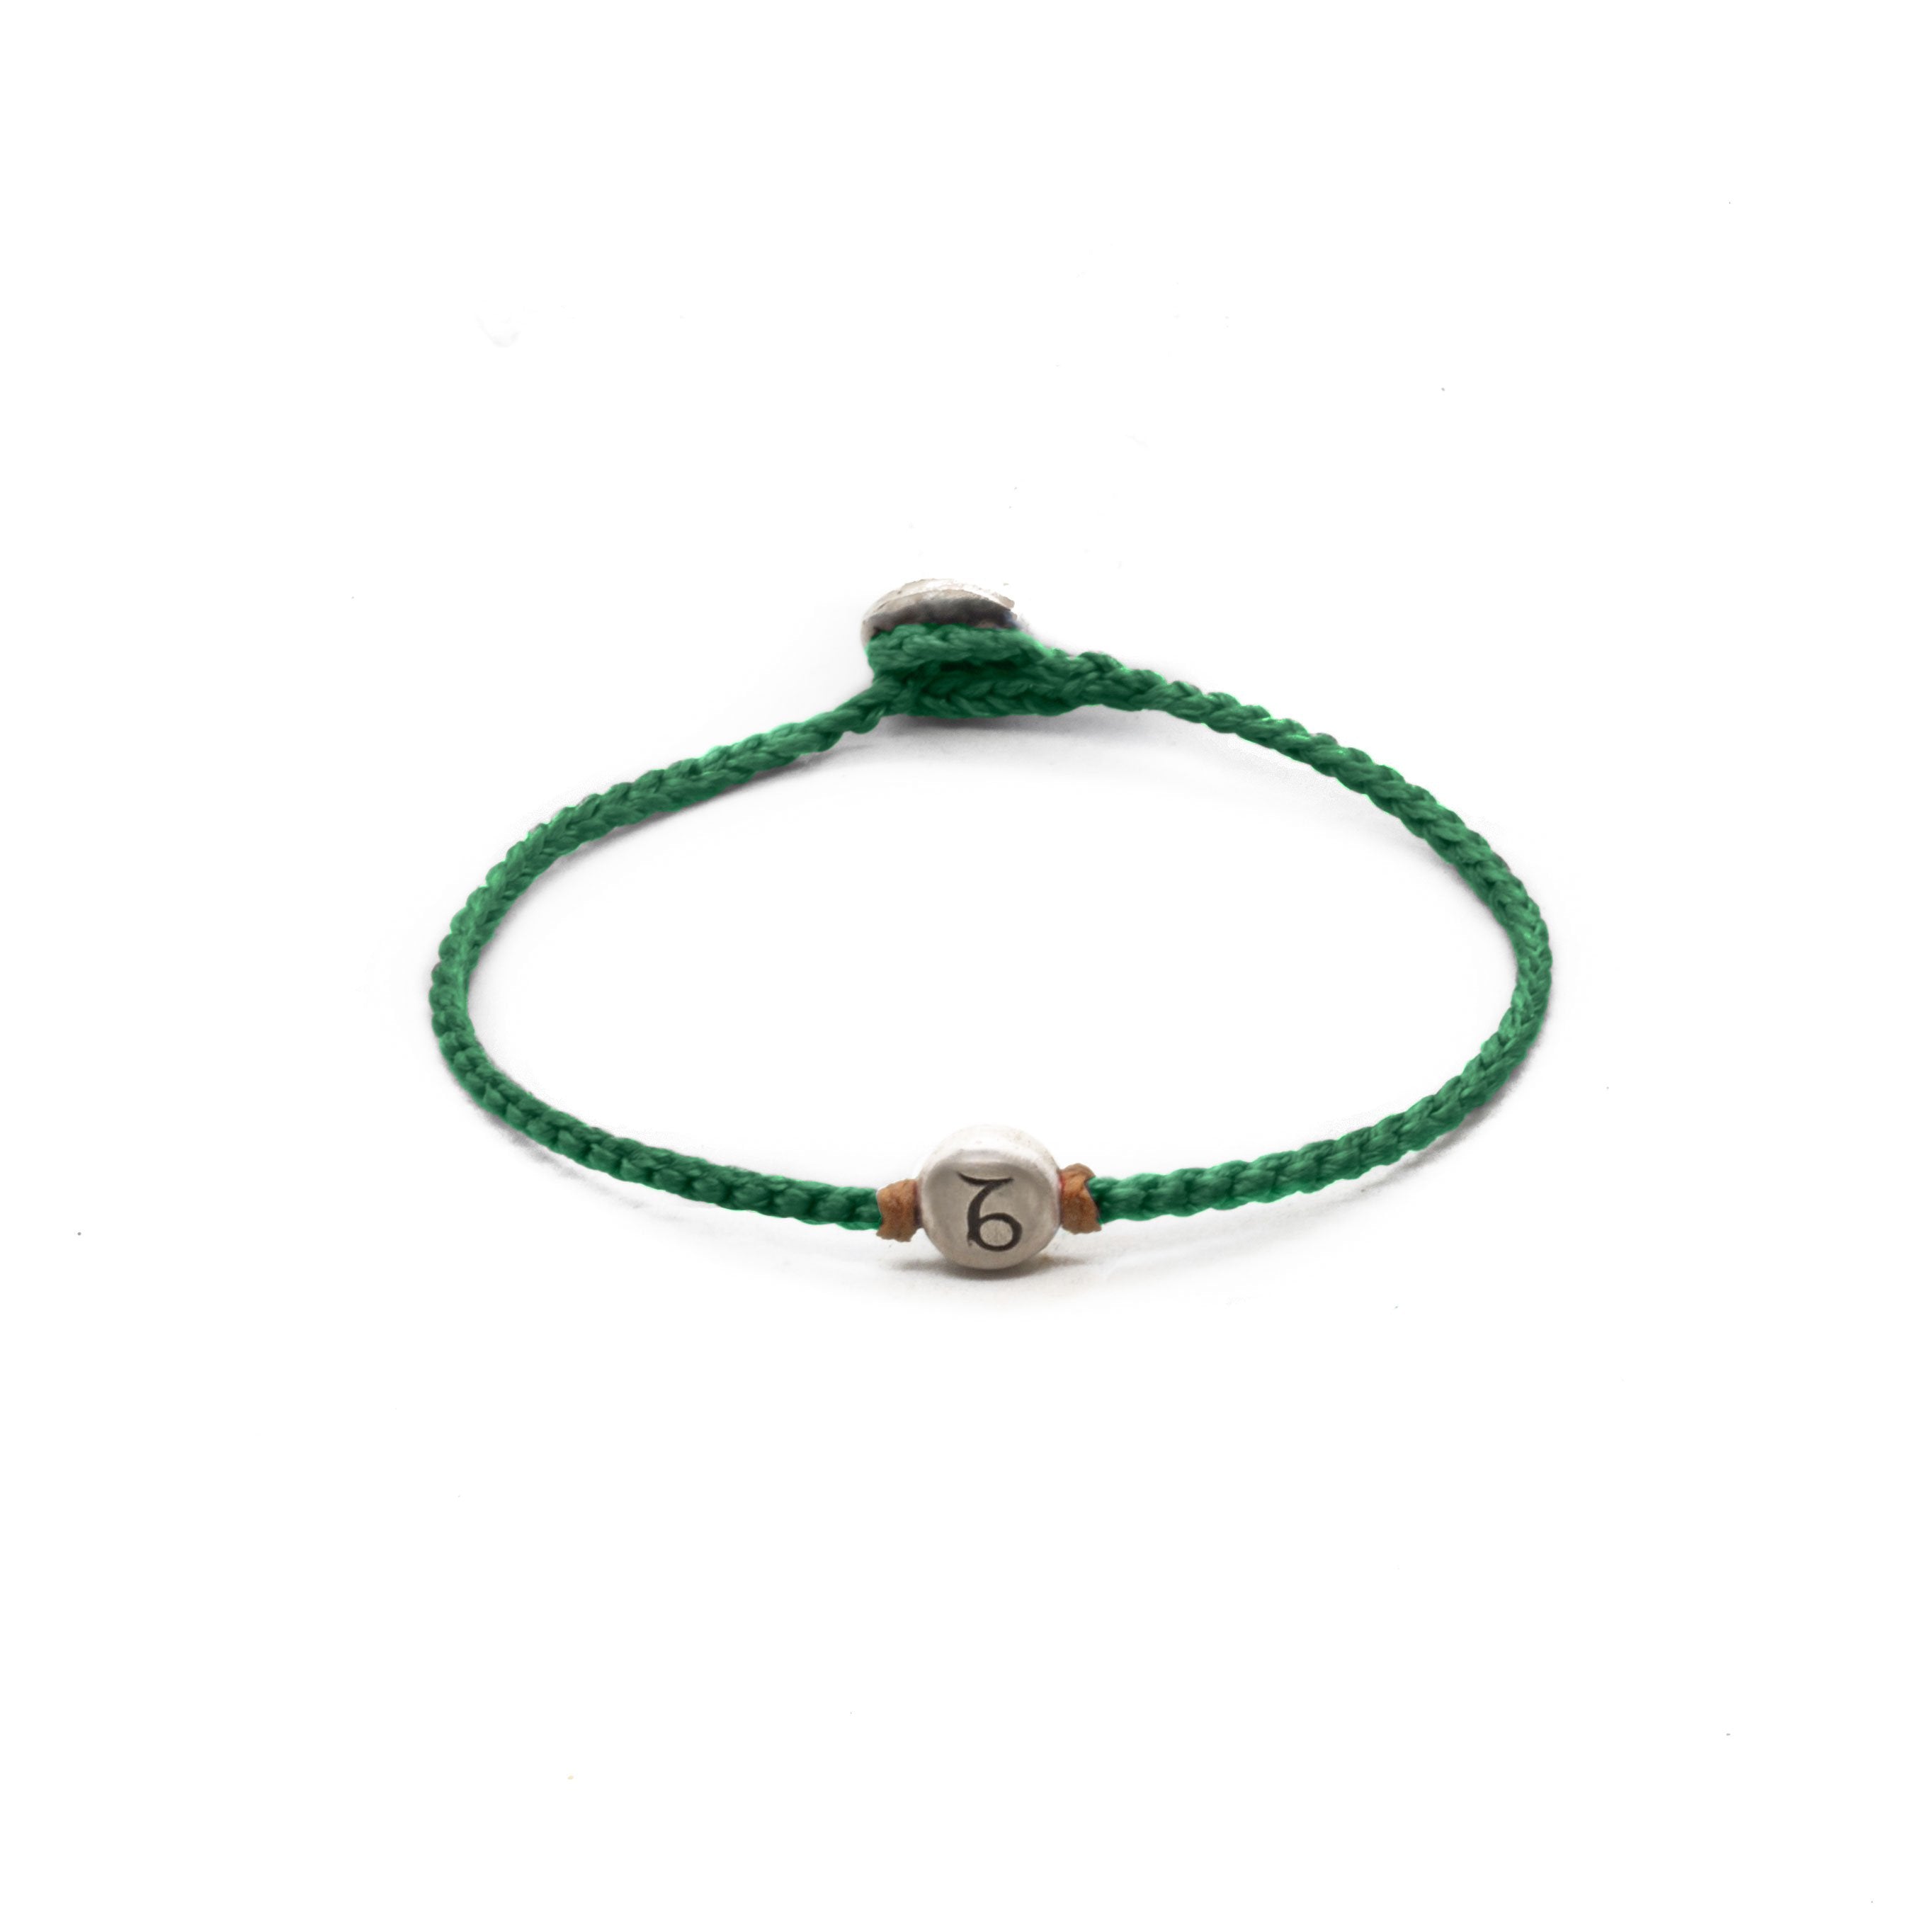 Silver Capricorn zodiac sign bracelet with green hand braided chain.